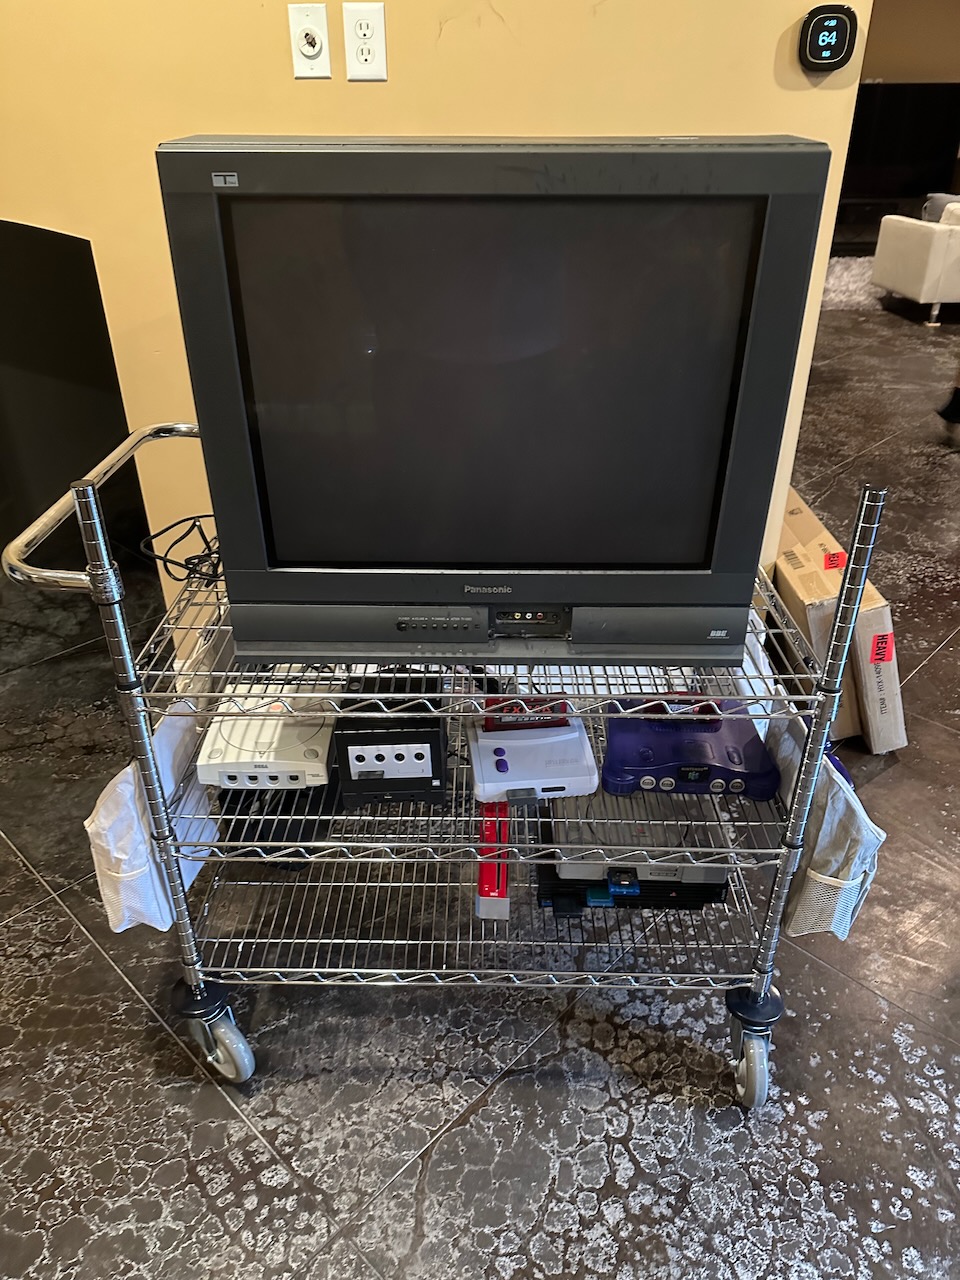 The same cart but with a 27" Panasonic CRT TV and several retro consoles